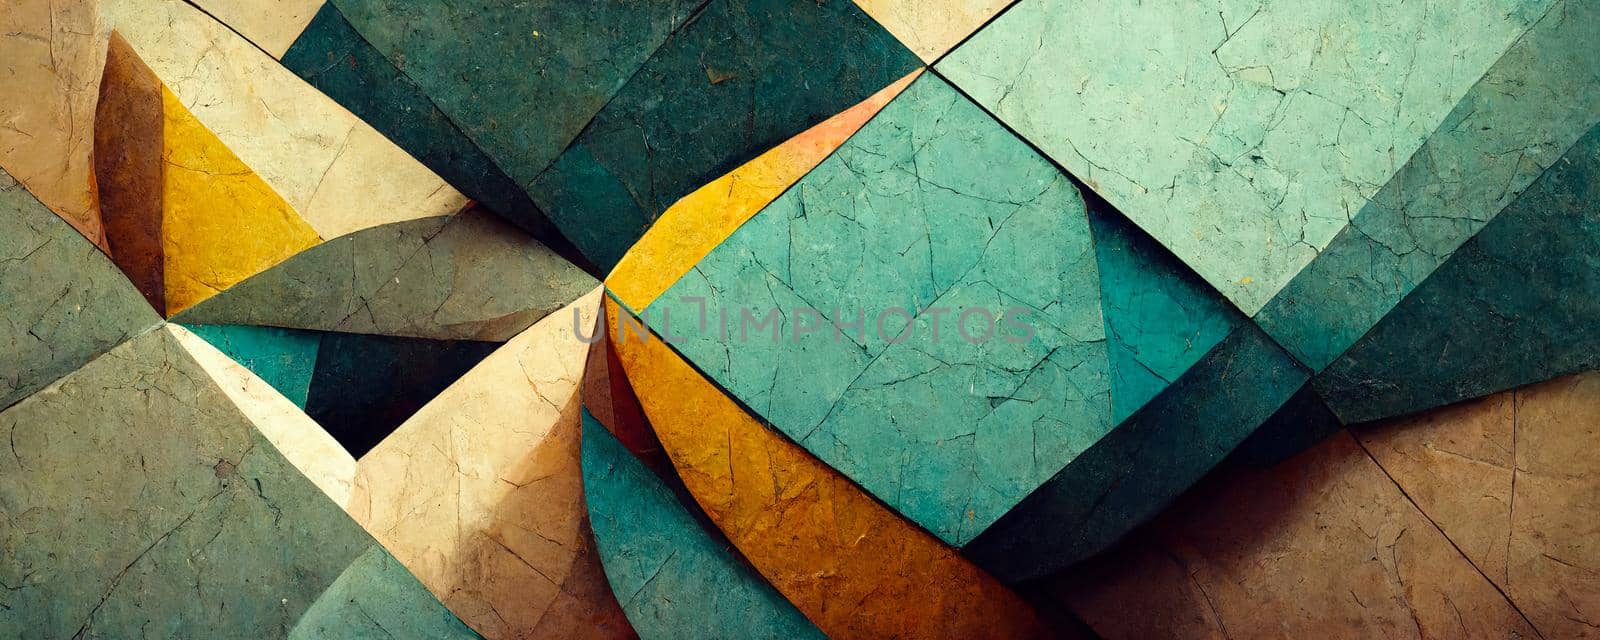 cubes of yellow and turquoise color in the form of an abstract pattern.